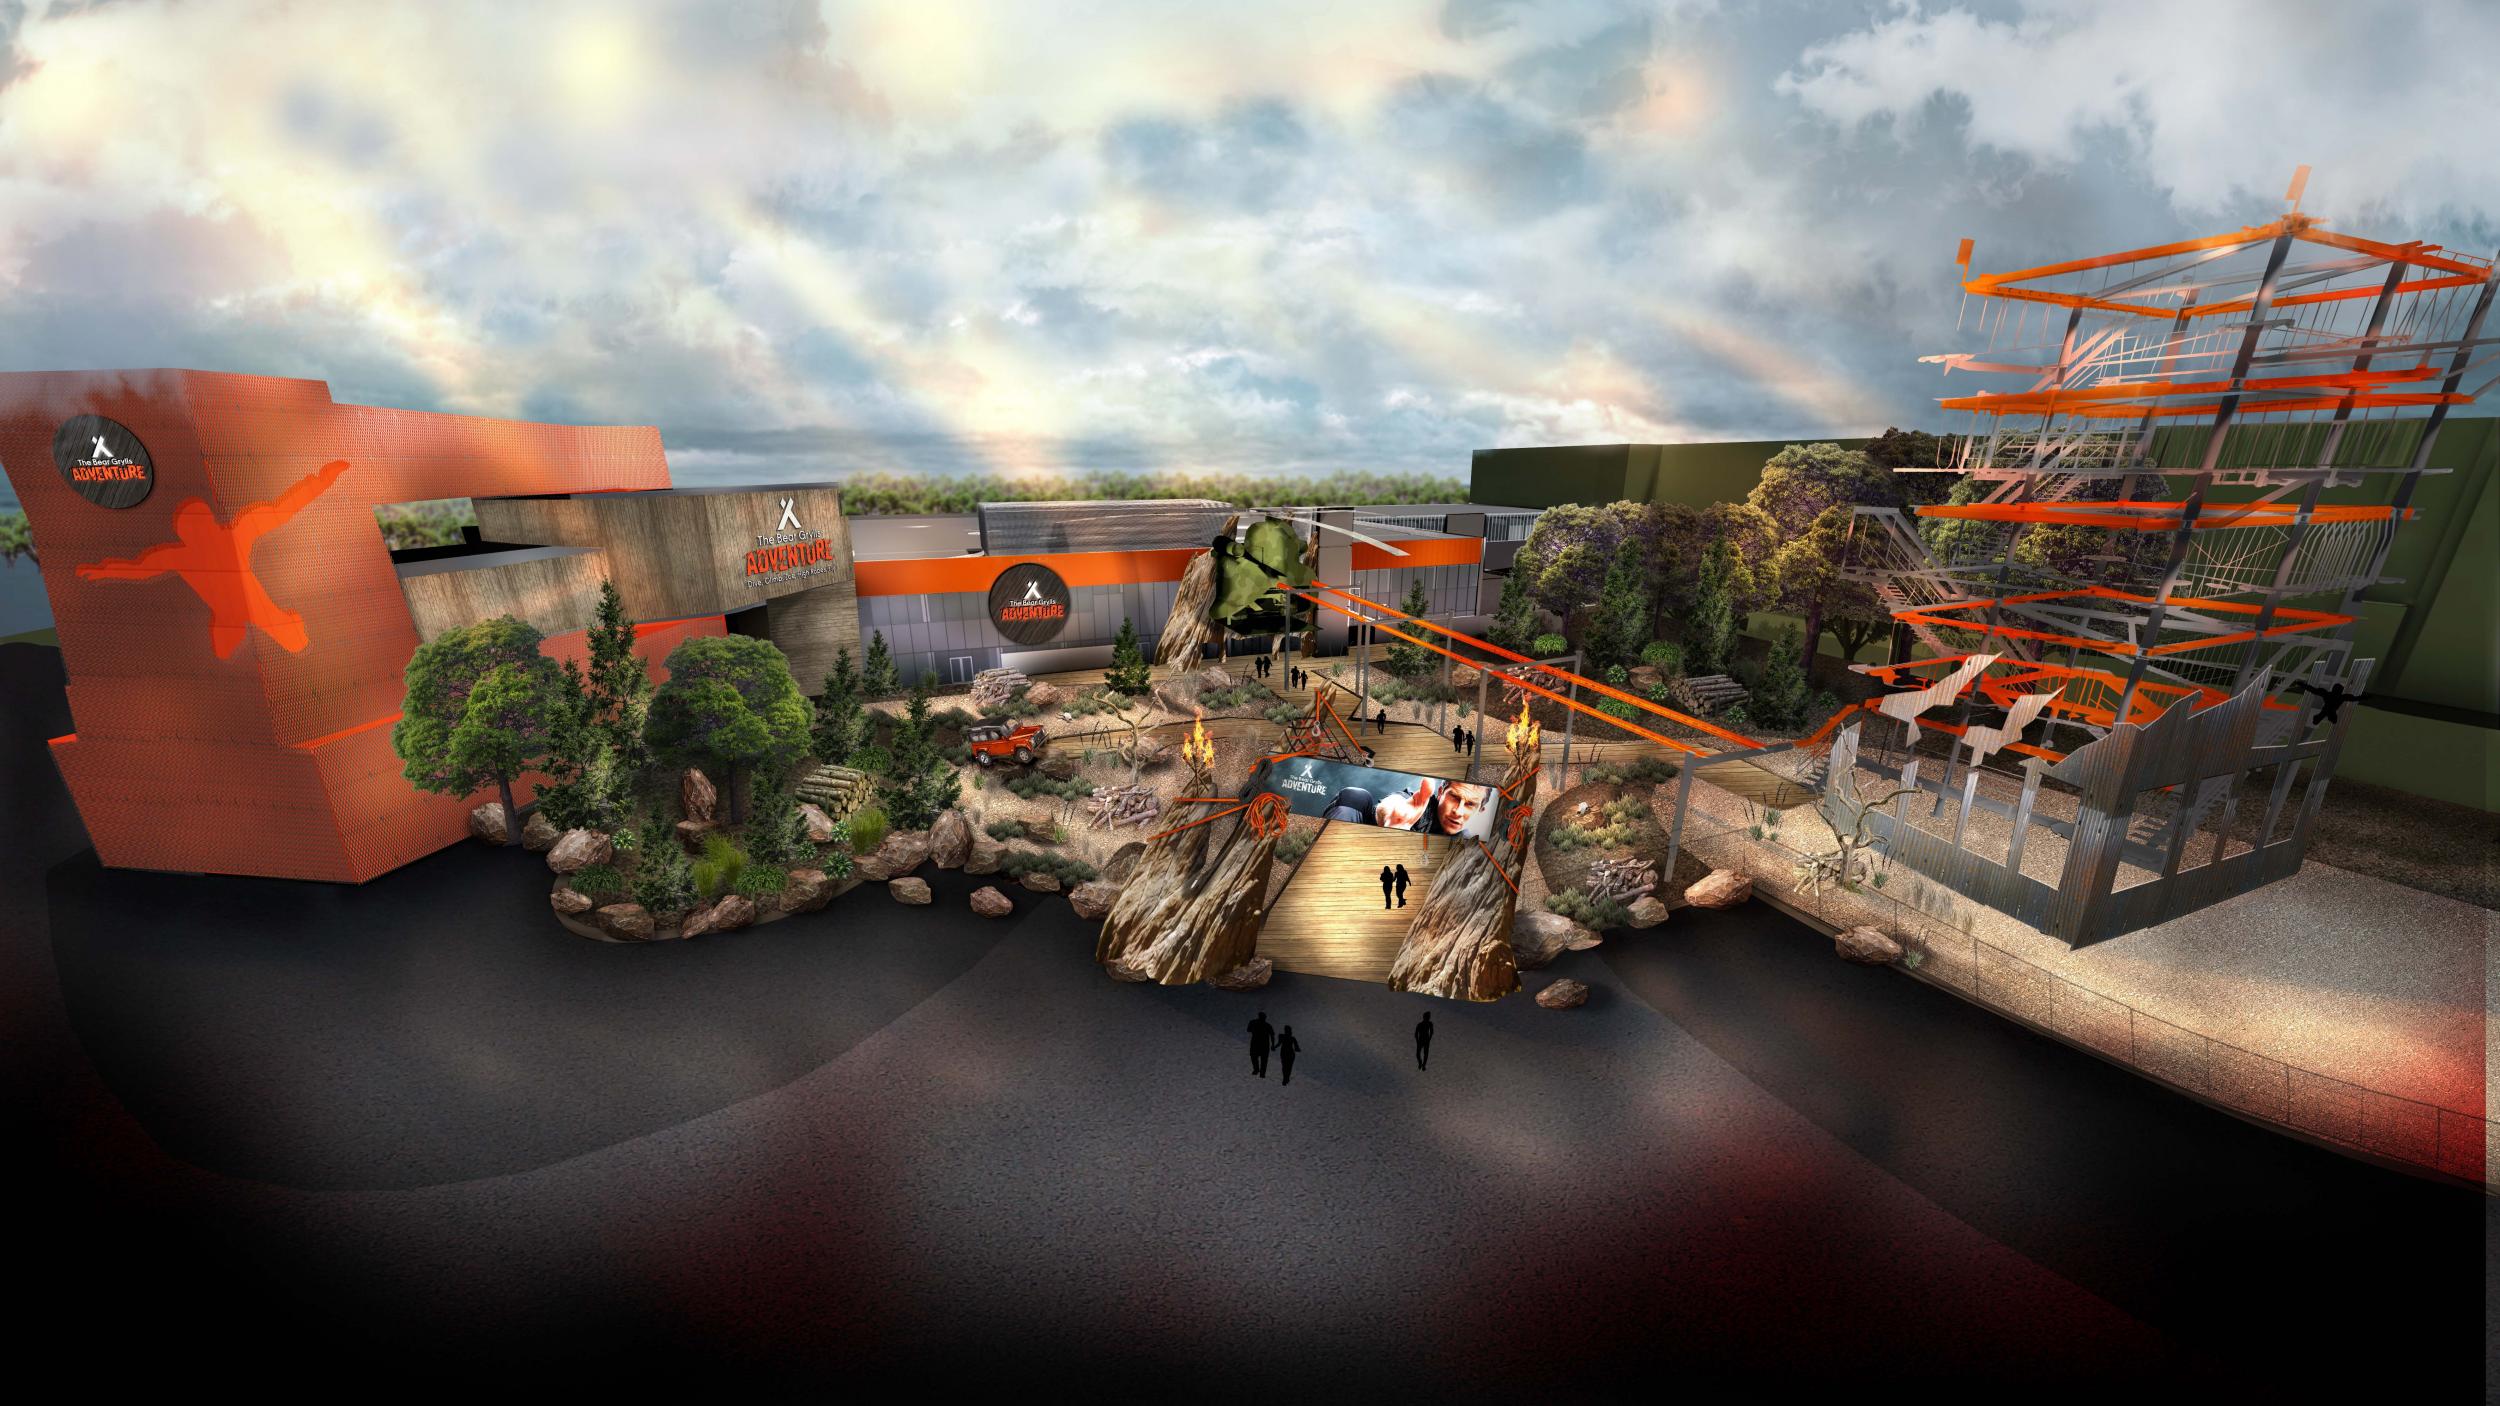 The £20m attraction is expected thousands of wannabe adventurers